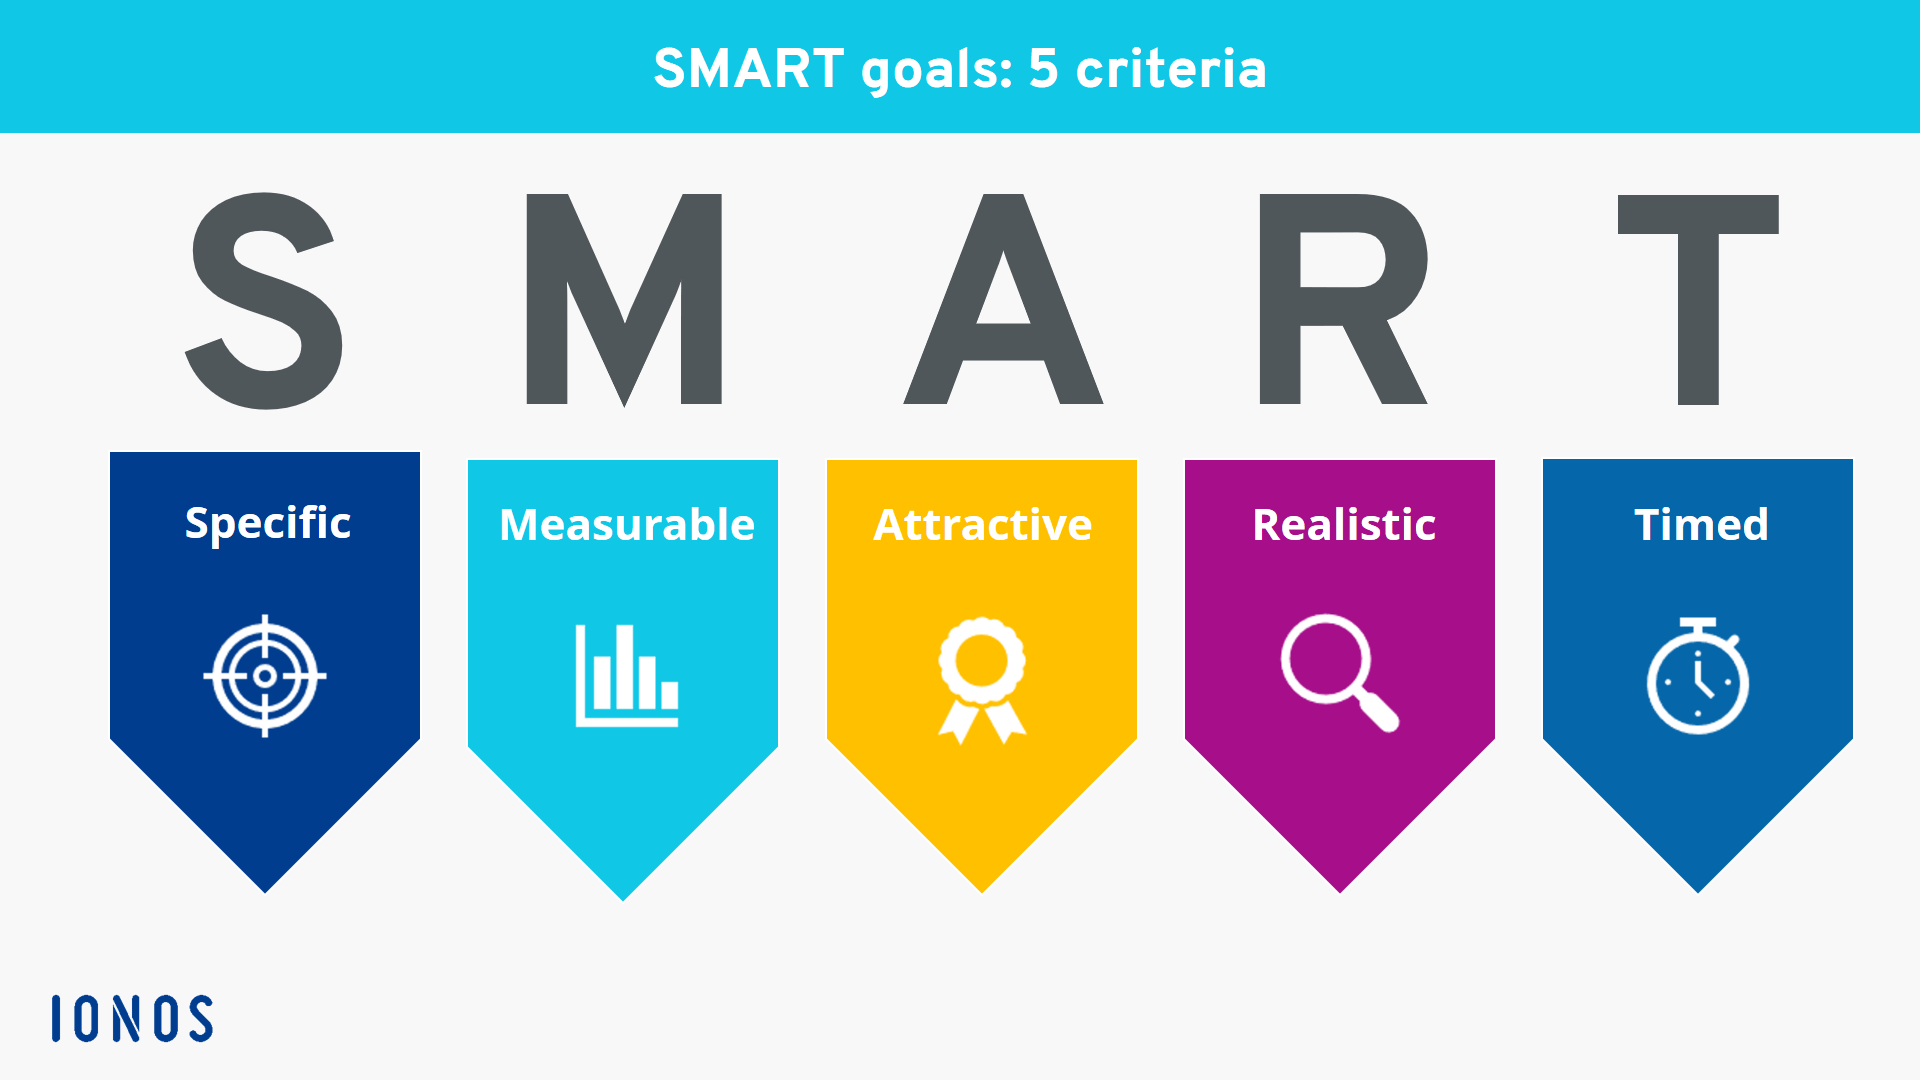 The SMART acronym, decoded